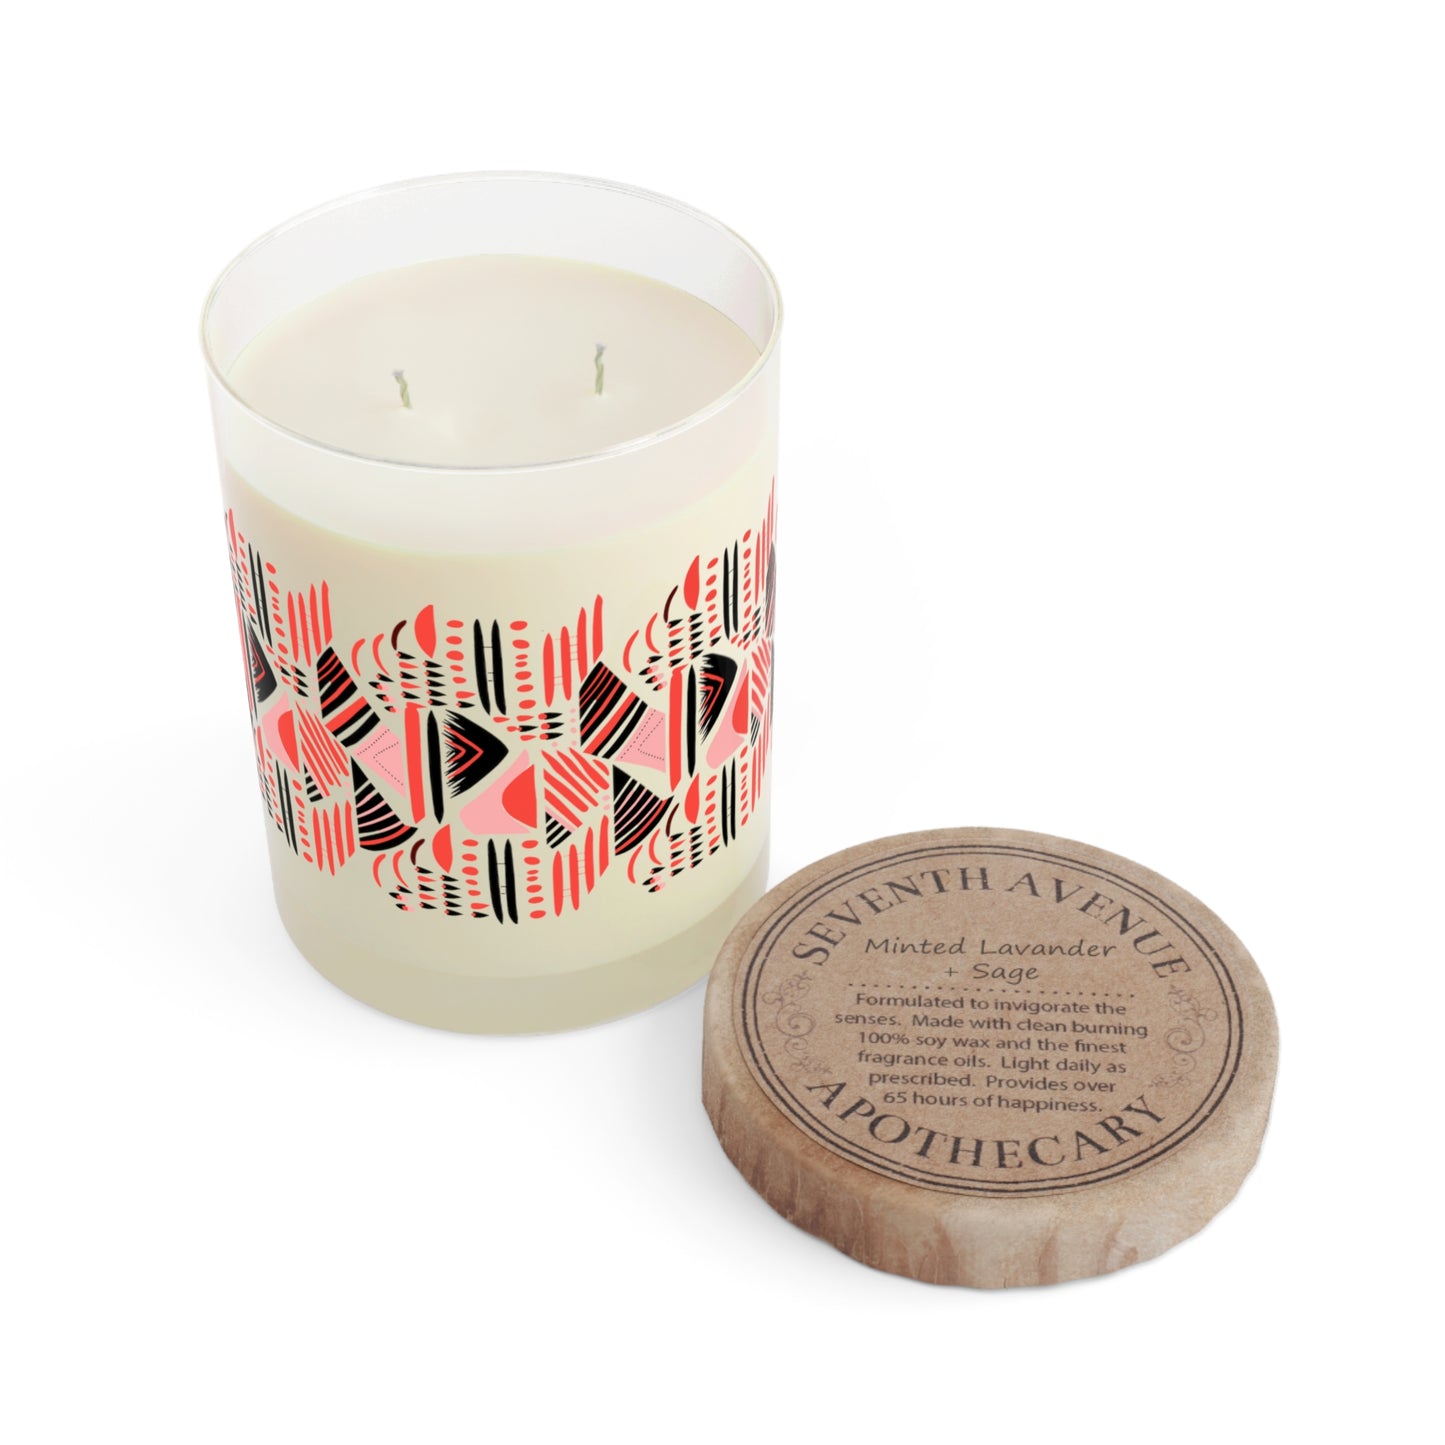 Regenbogen x Seventh Avenue Apothecary Collab // Burgos Scented Candle (3 scents)